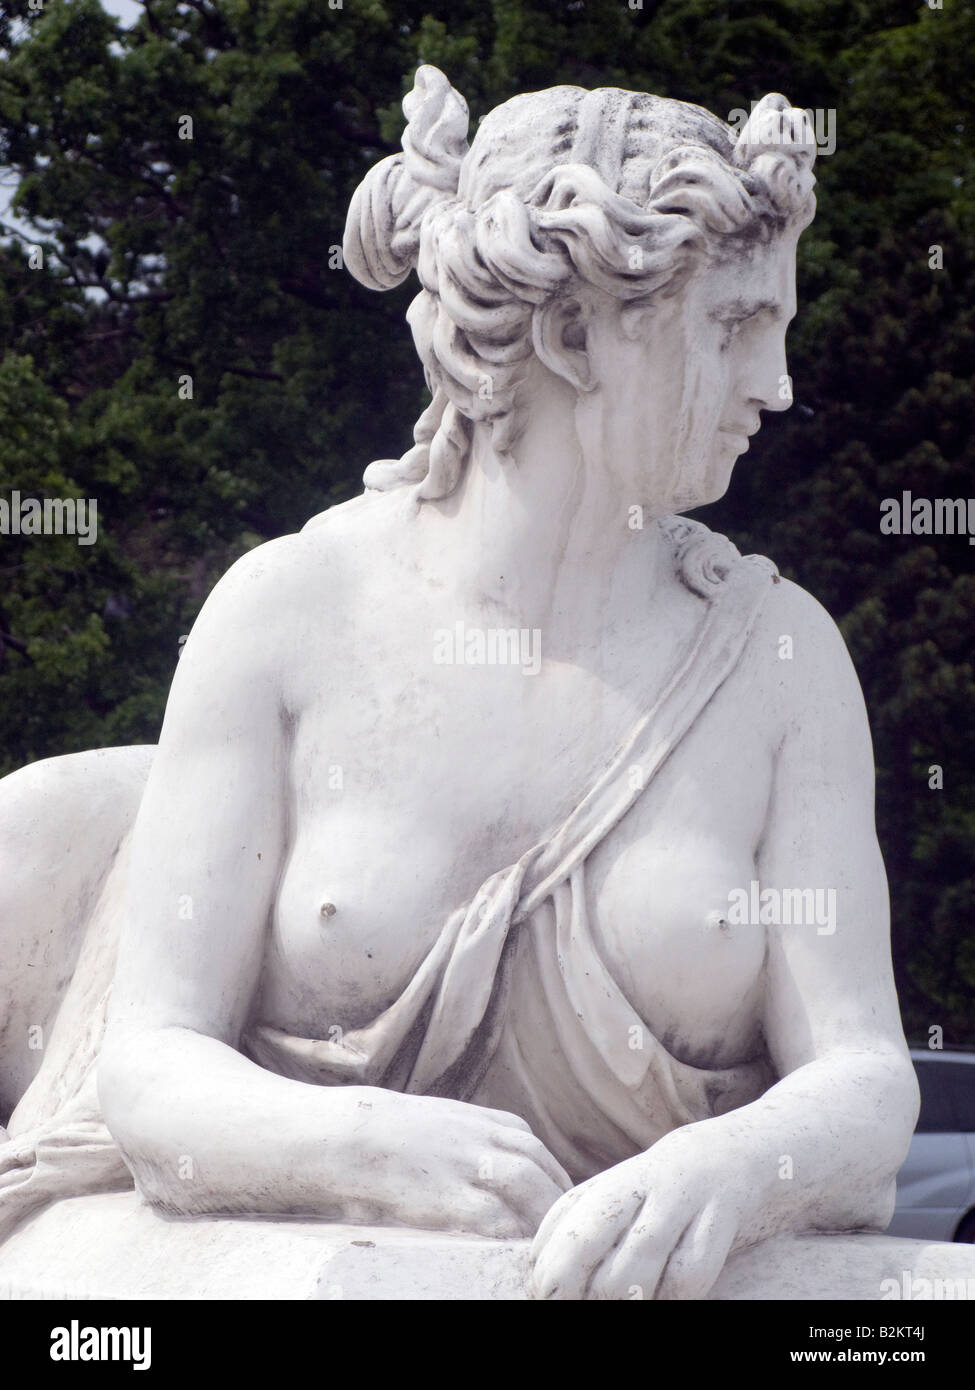 A statue in the gardens of The Schonbrunn Palace near Vienna Austria Stock Photo